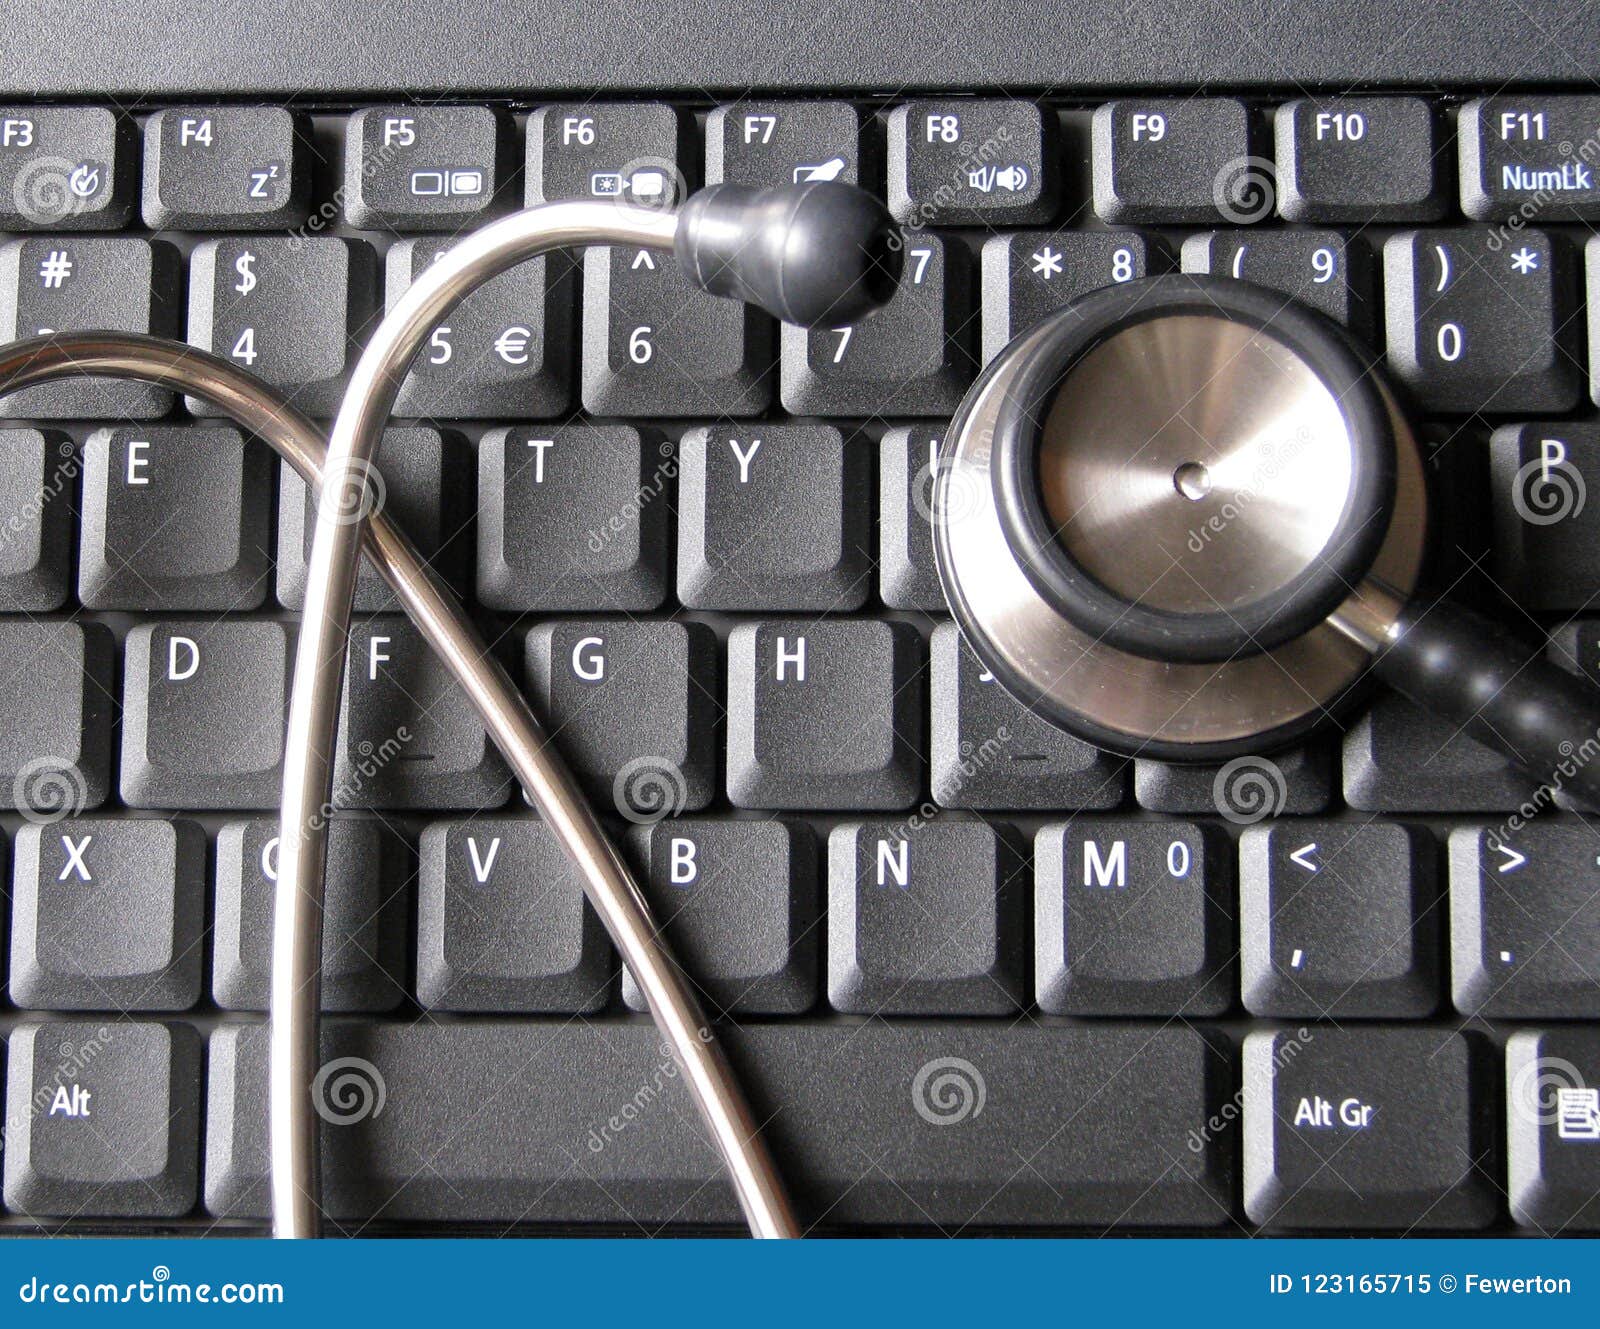 medical stethoscope on top of laptop computer keyboard. illustrative of healthcare and technology, informatics, bioinformatics